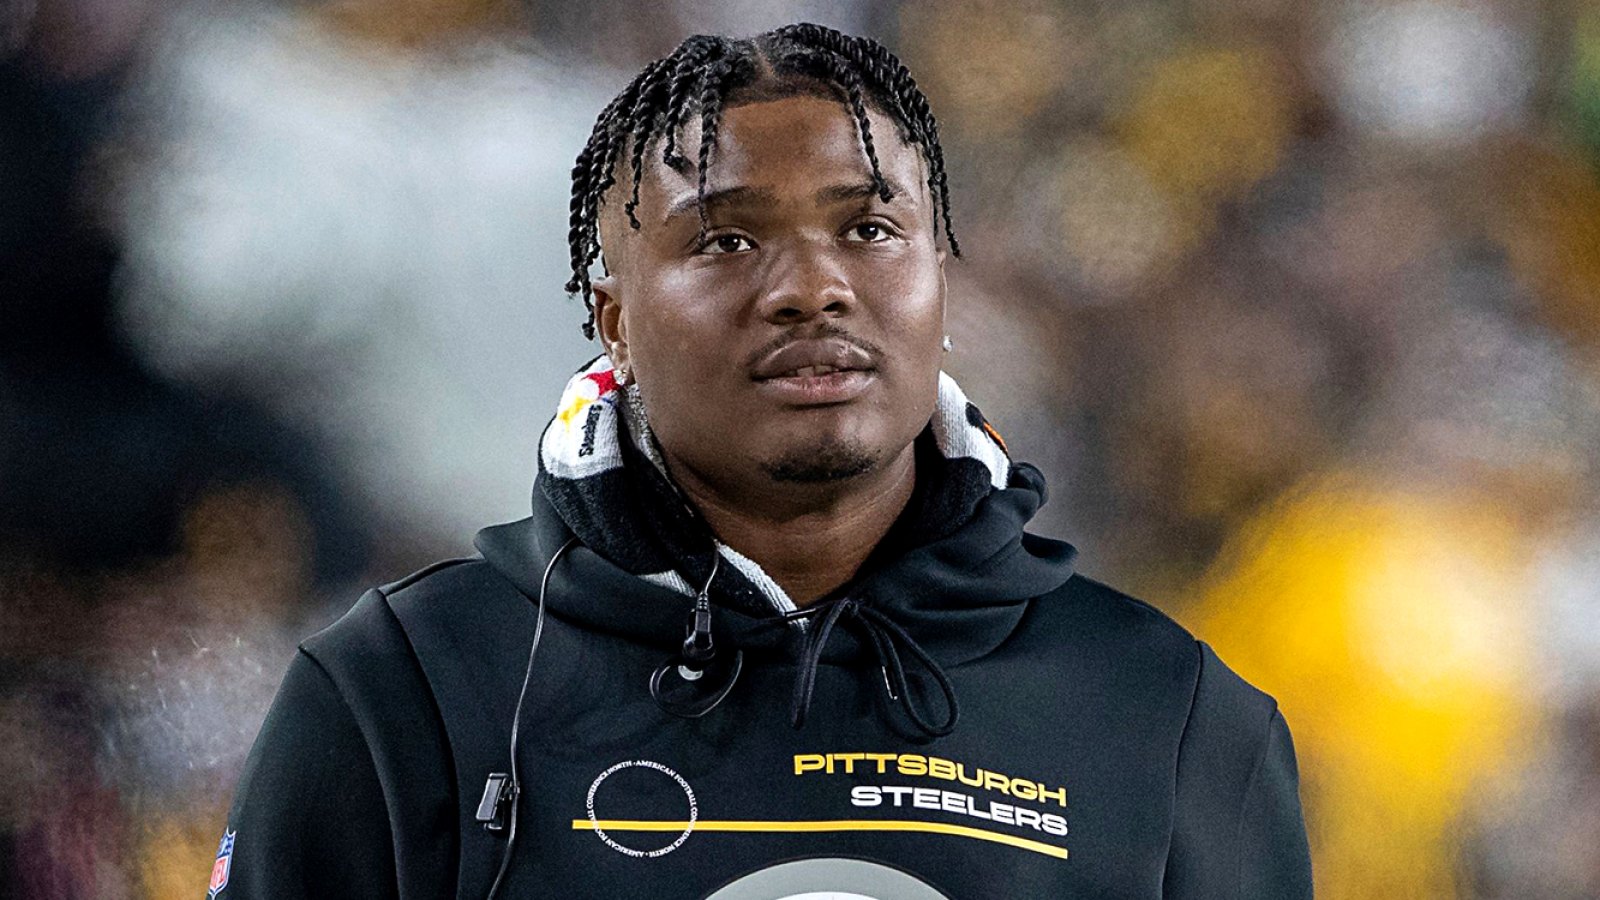 Pittsburgh Steelers Quarterback Dwayne Haskins Dead at 24: 'Devastated and at a Loss for Words'